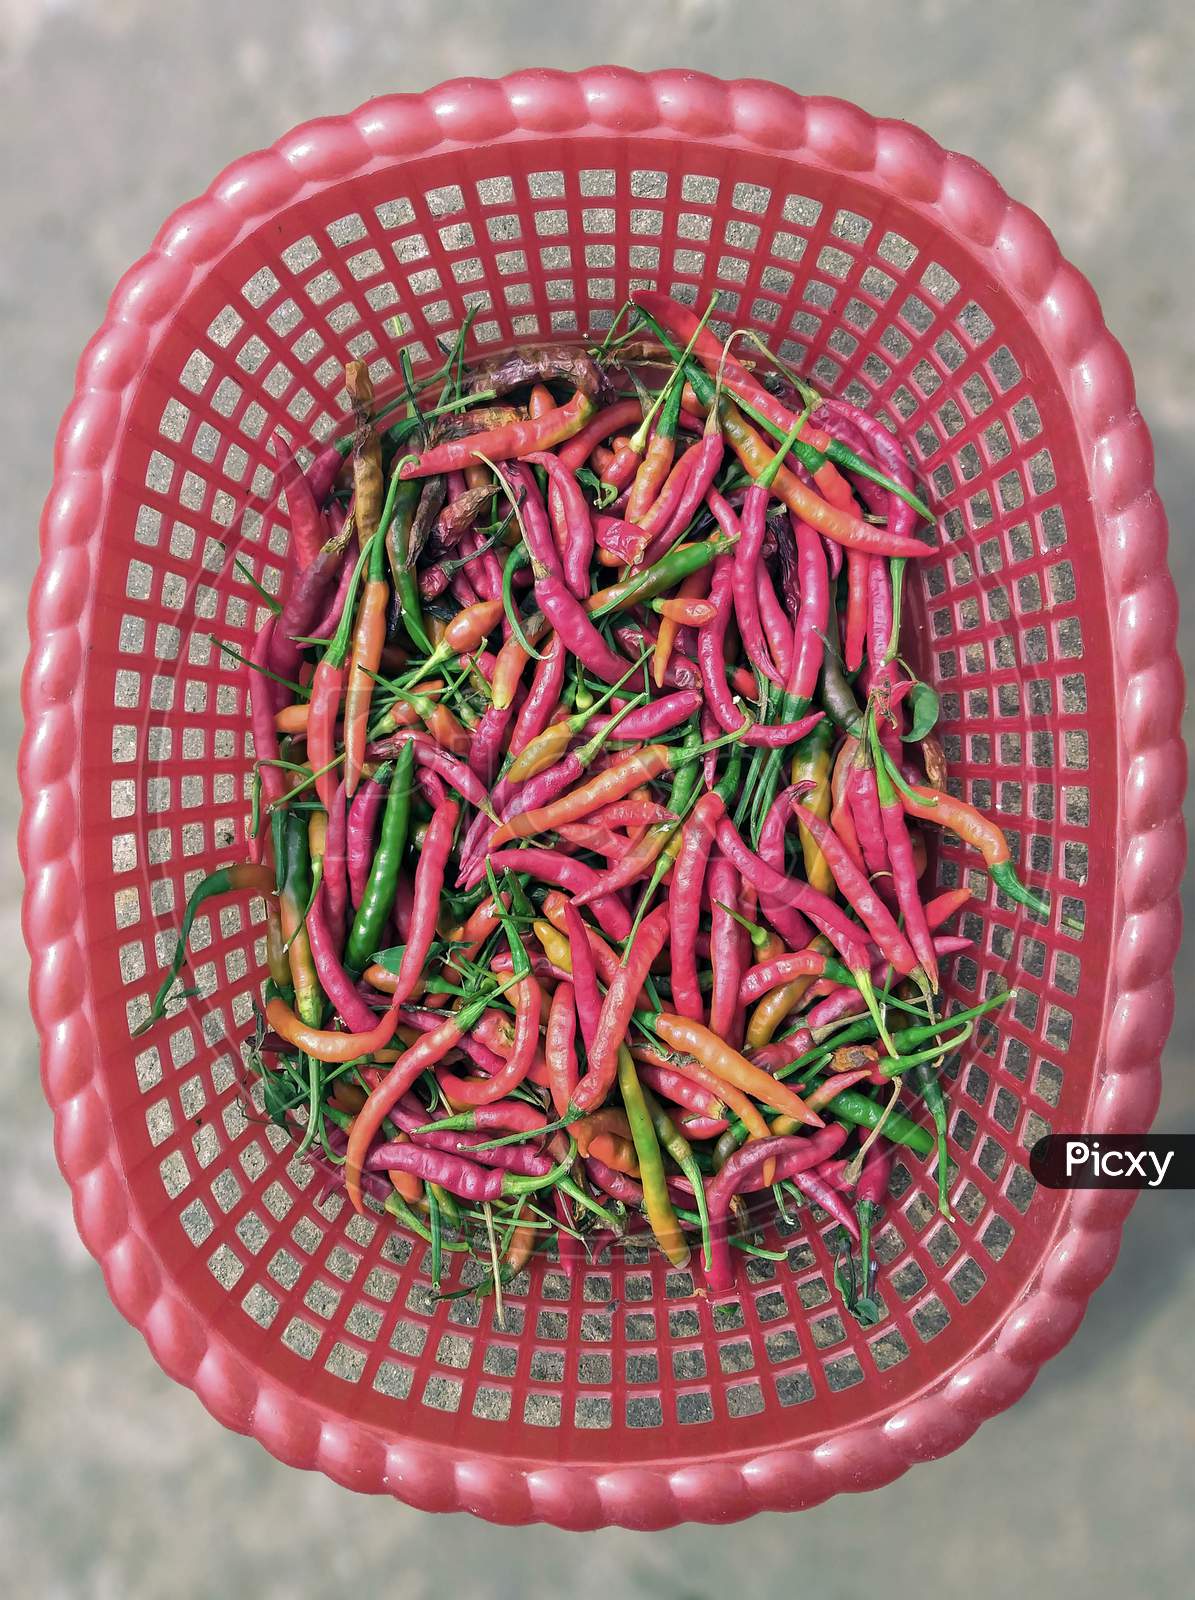 Indian Bird'S Eye Chilli In A Basket, A Variety From The Species Capsicum , Commonly Found In Asia.